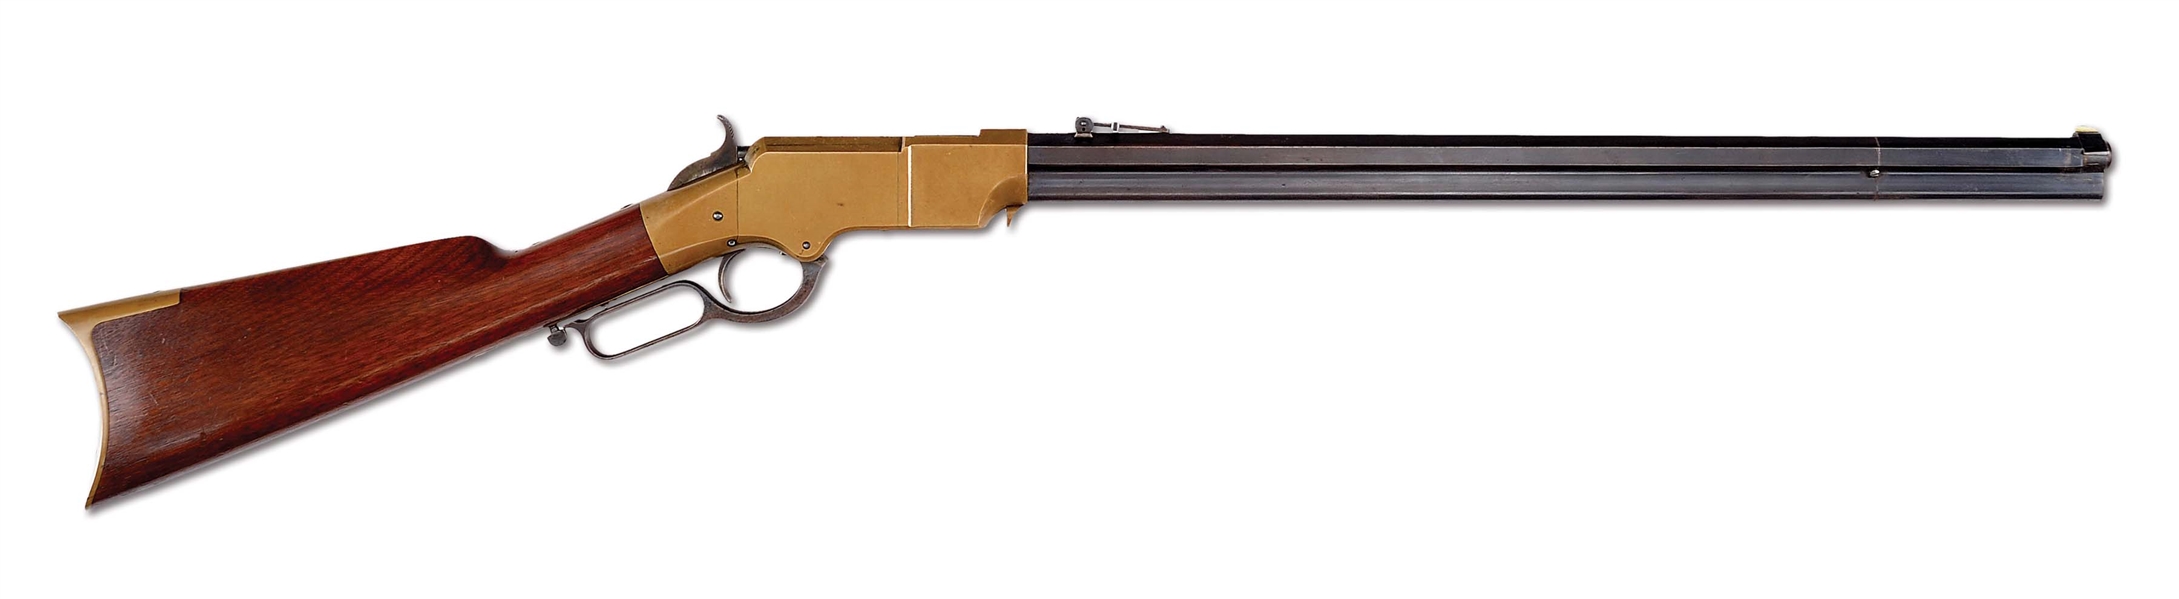 (A) SUBLIME NEW HAVEN ARMS MODEL 1860 HENRY RIFLE (LAST YEAR - 1866).